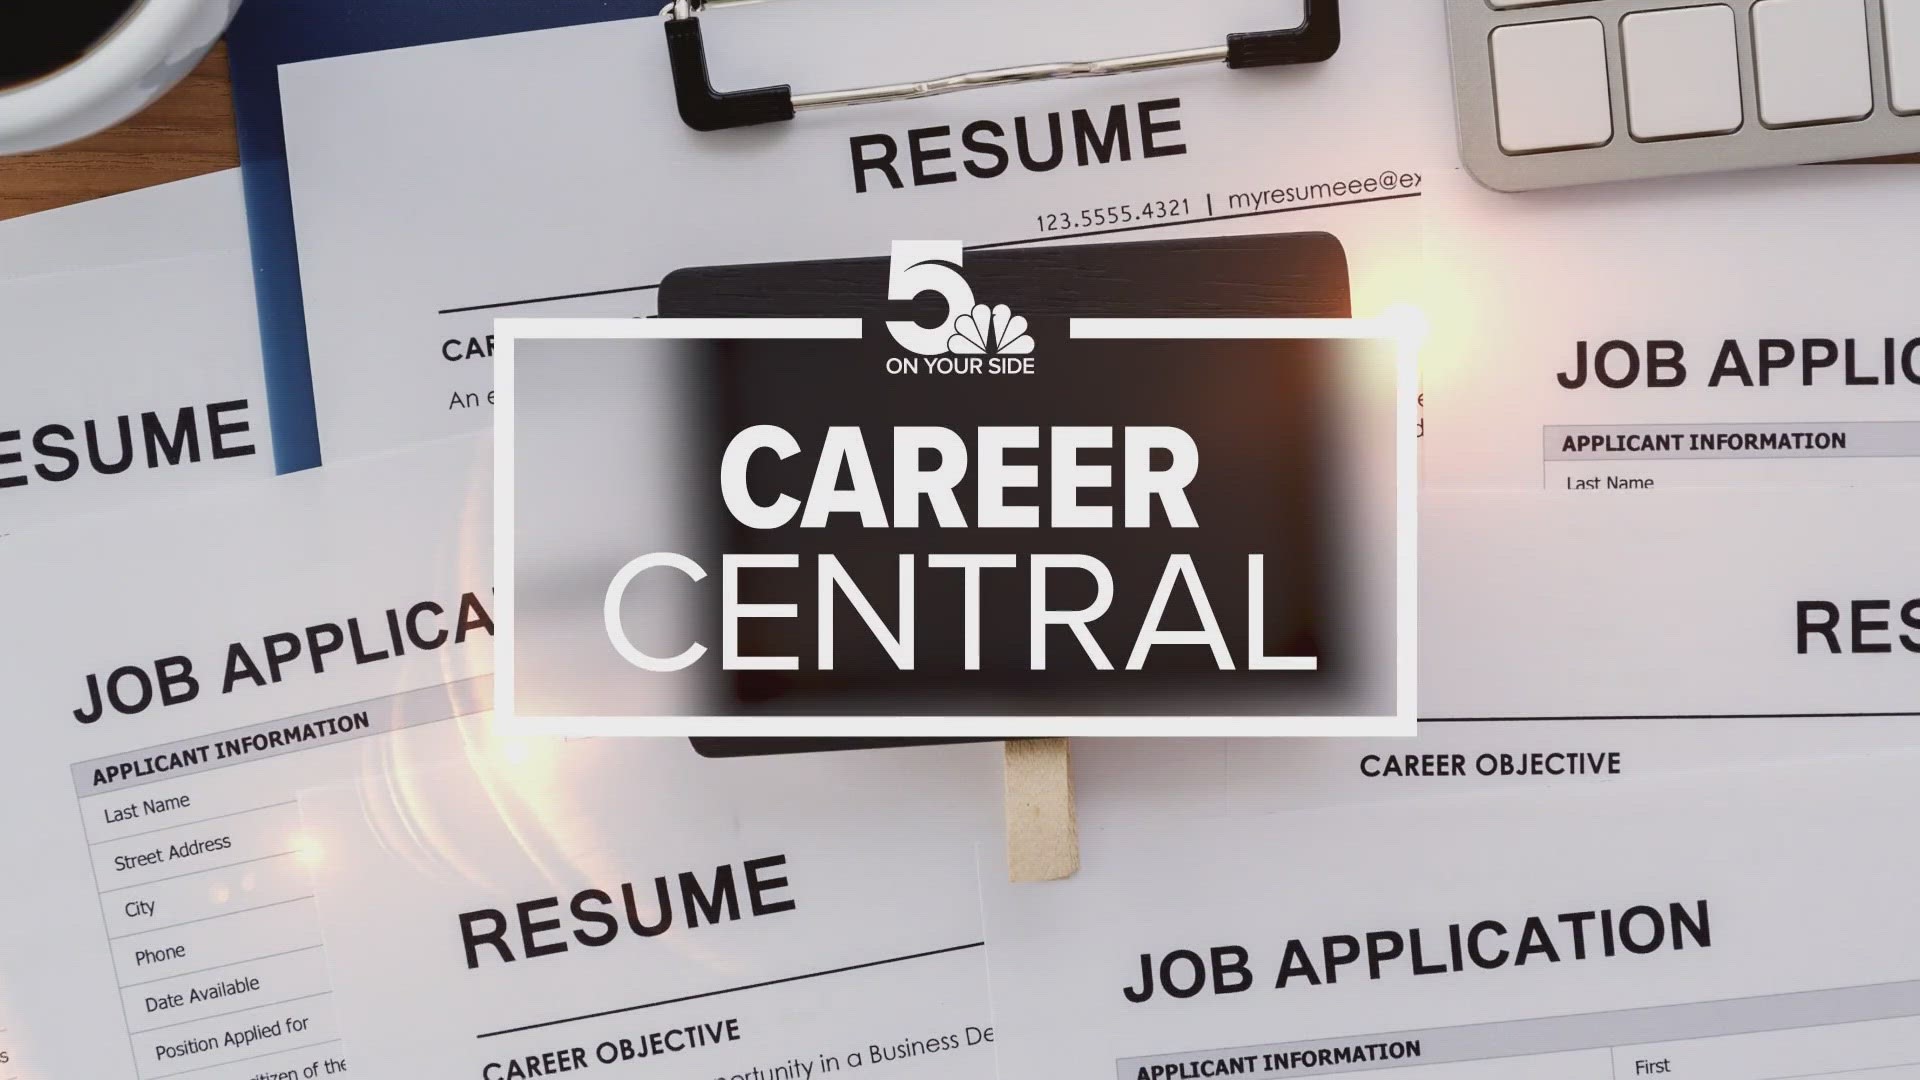 Looking for a job? There are plenty of opportunities as hiring events are happening across the St. Louis area.